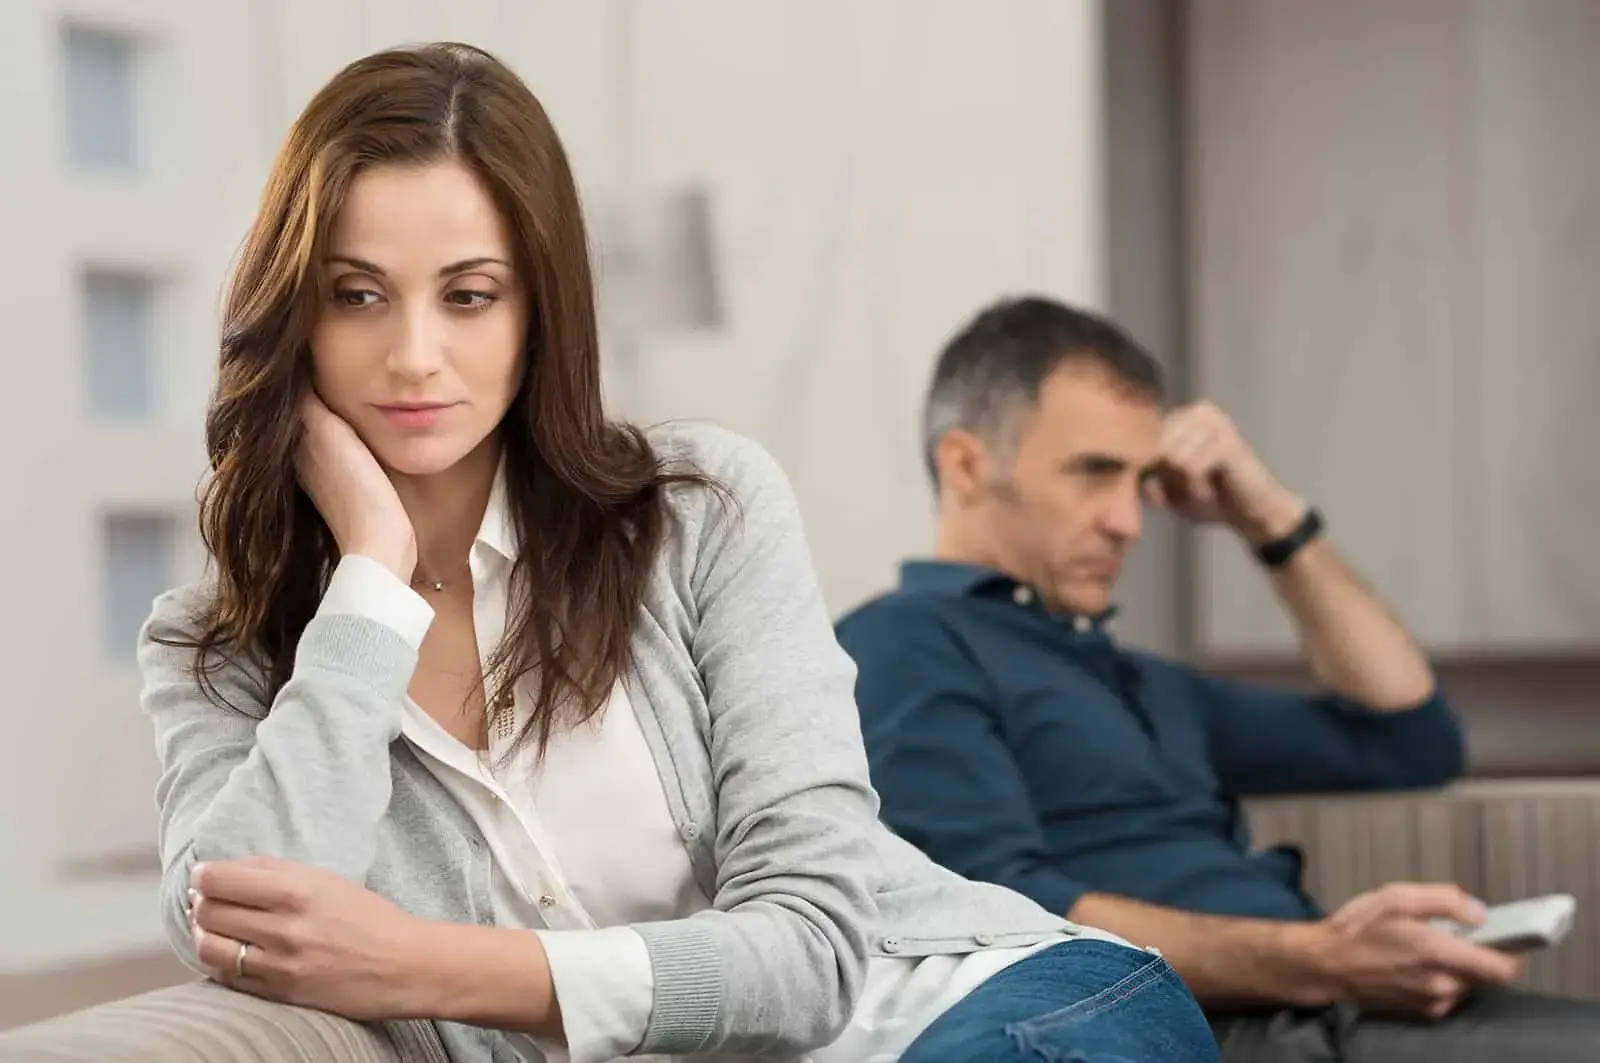 5 Possible Reasons for Lack of Affection That Can Be Responsible for Break Up